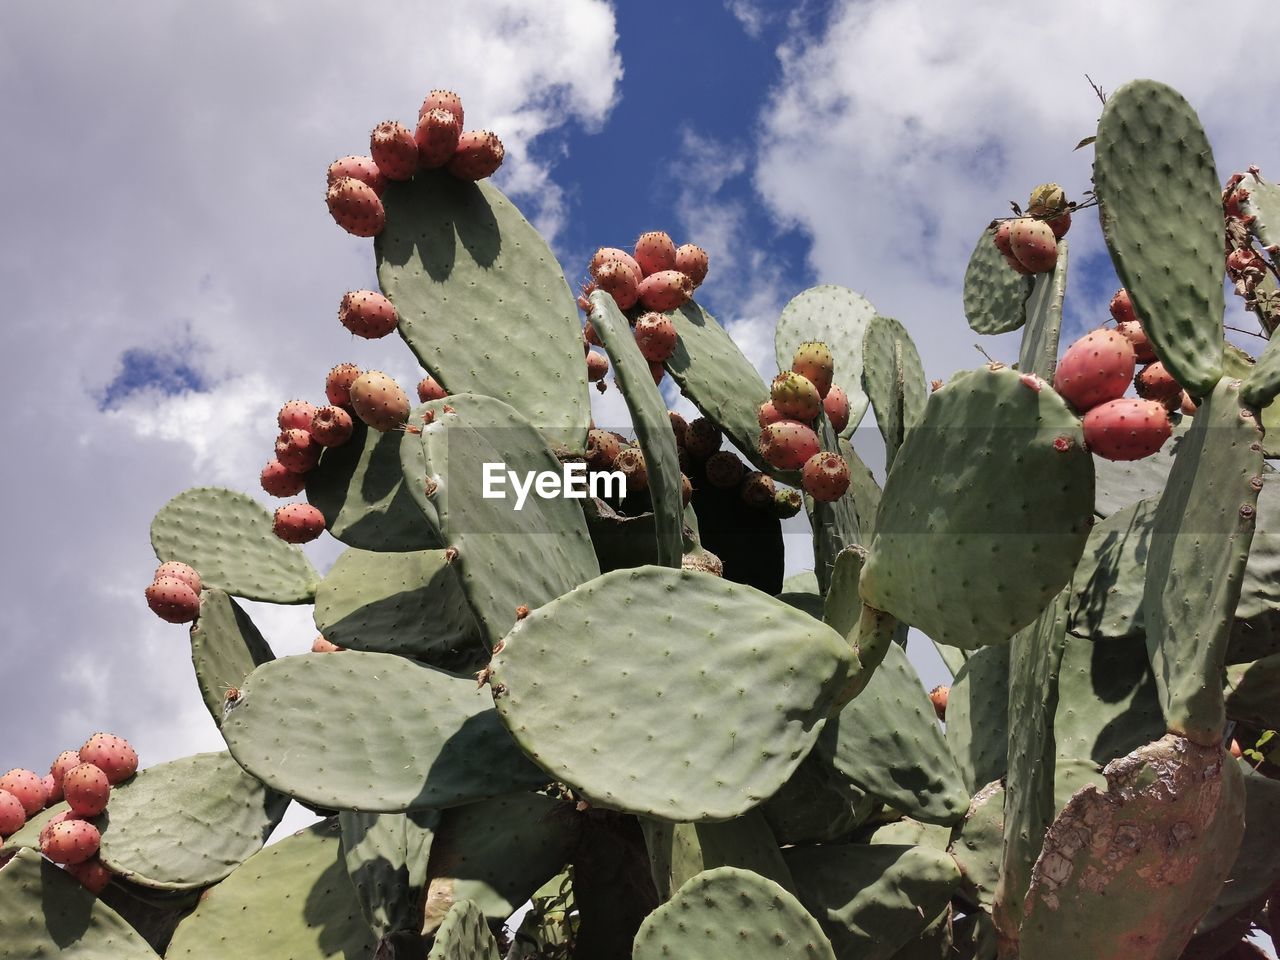 LOW ANGLE VIEW OF SUCCULENT PLANT GROWING ON CACTUS AGAINST SKY